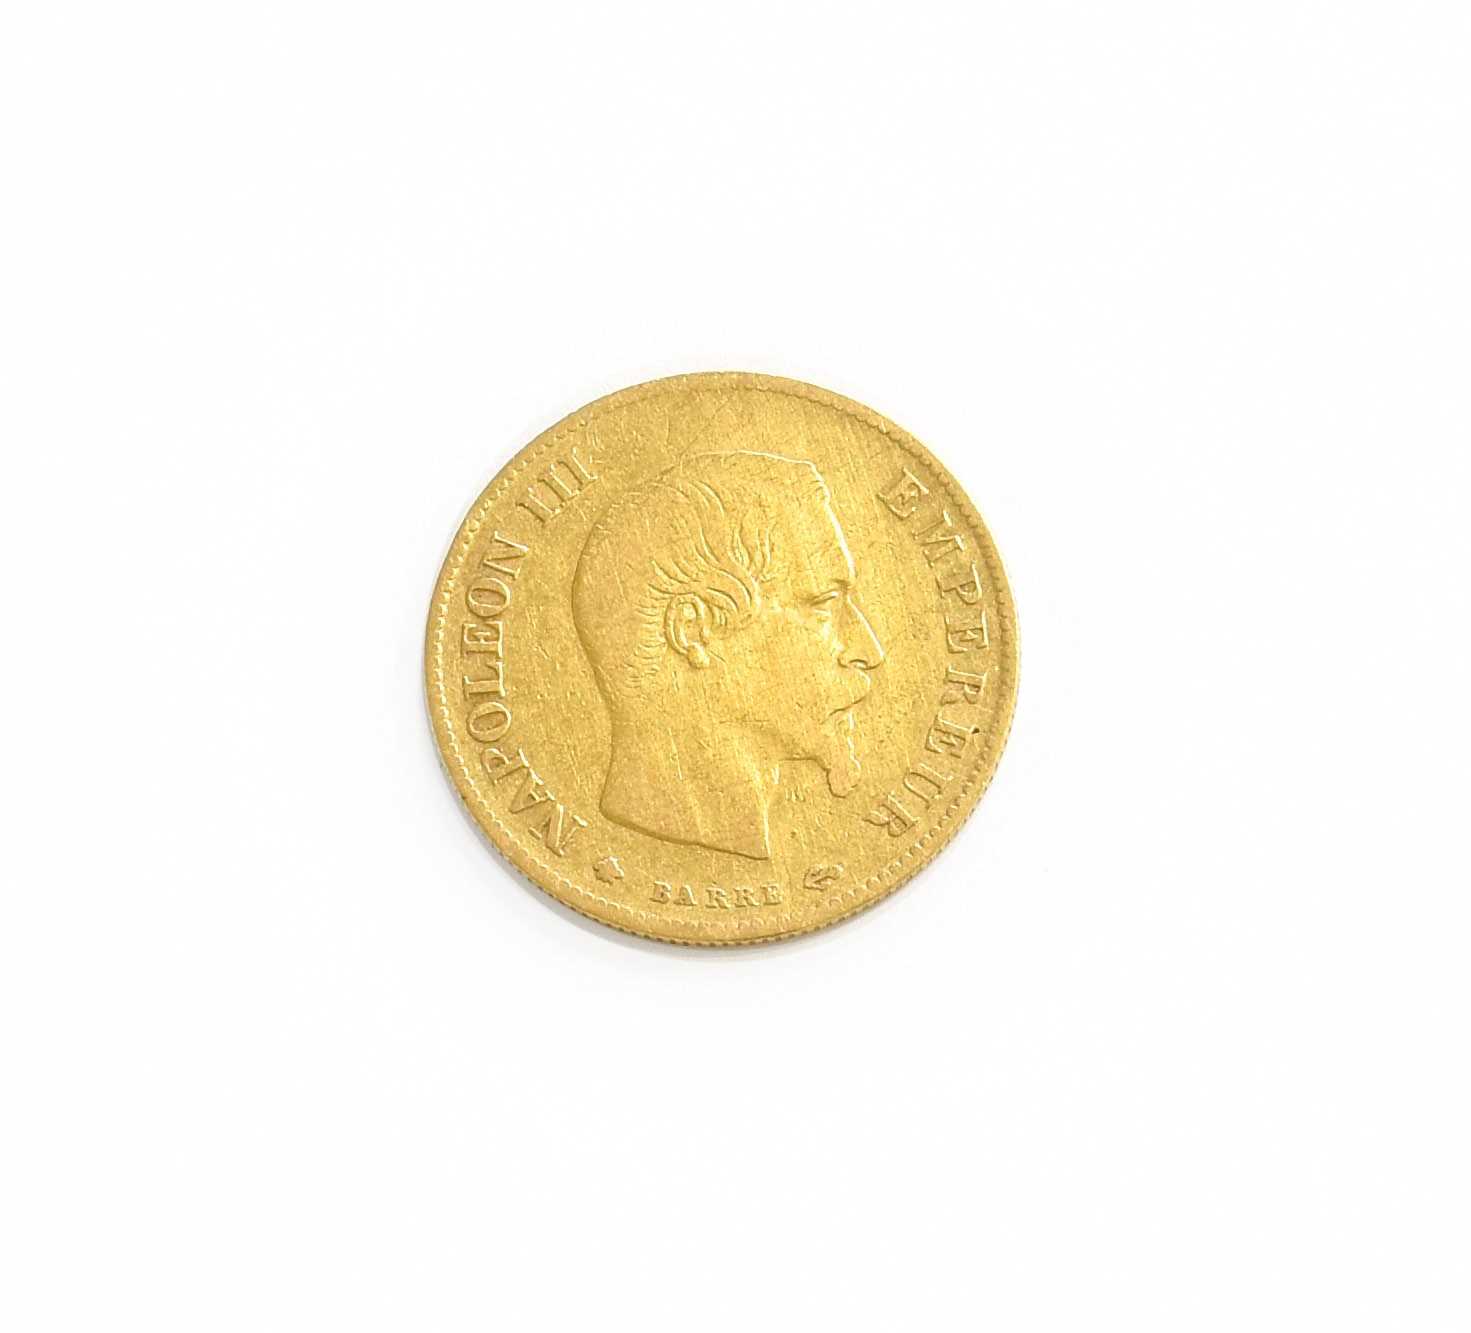 France, 10 Francs 1859 BB, (.900 gold, 19mm, 3.18g) obv. Napoleon III right, rev. denomination and